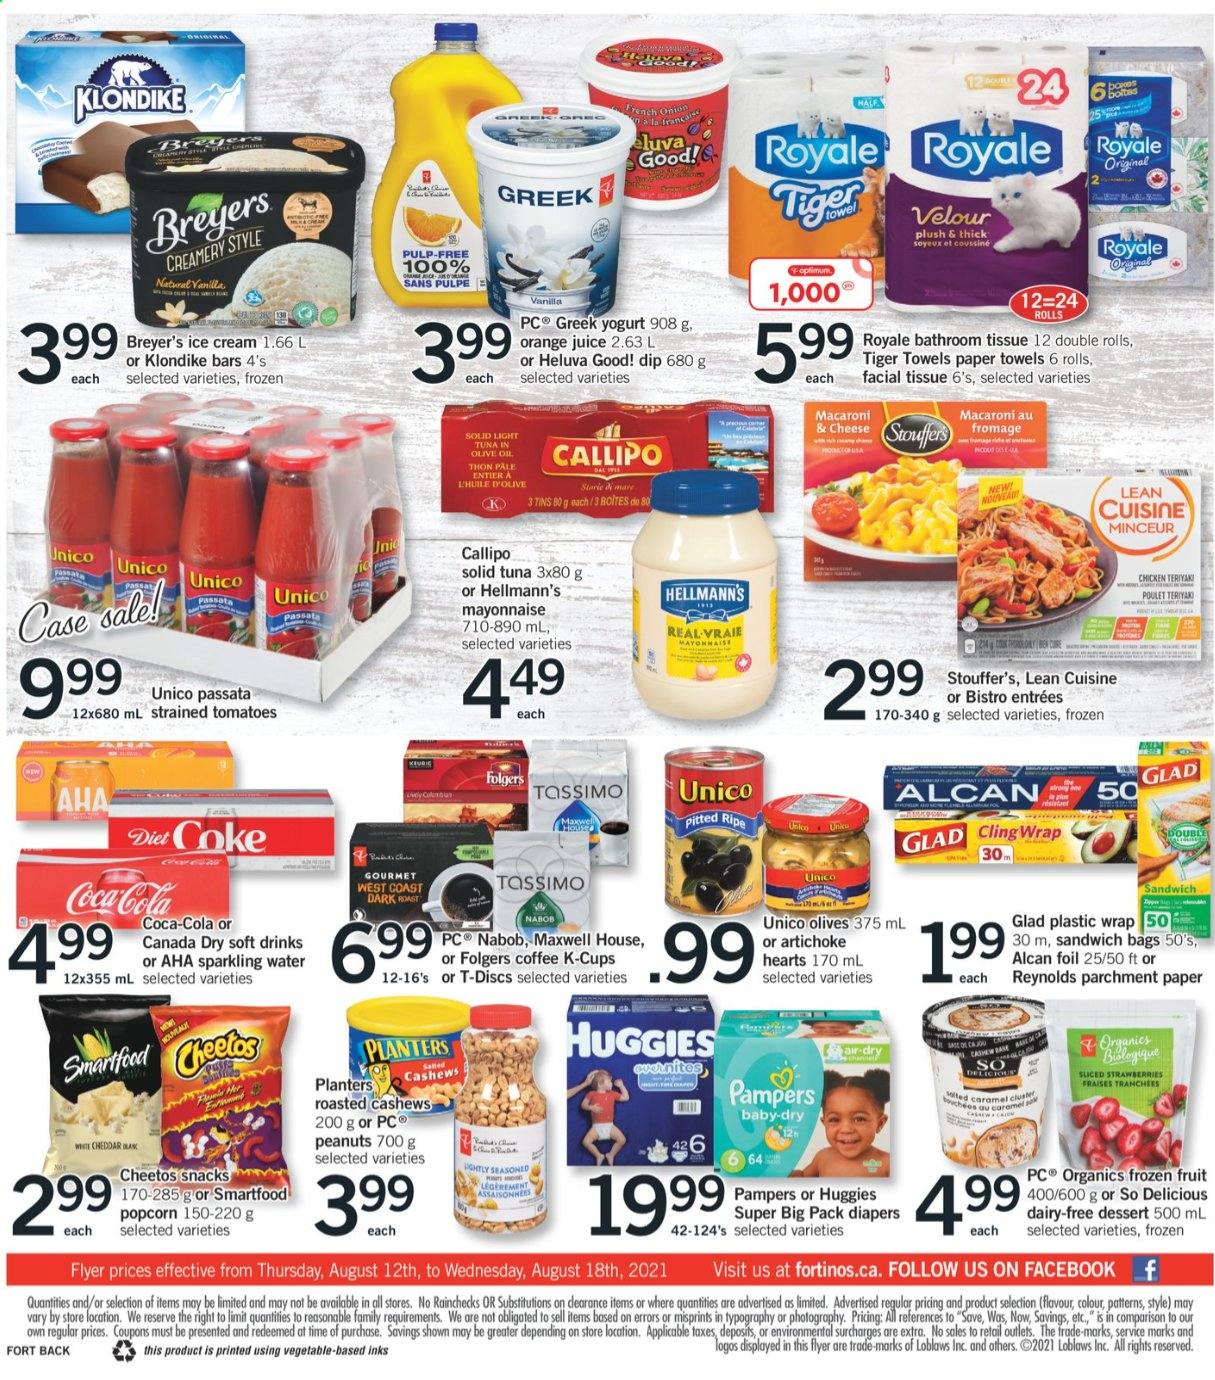 thumbnail - Fortinos Flyer - August 12, 2021 - August 18, 2021 - Sales products - artichoke, tomatoes, strawberries, tuna, macaroni & cheese, Lean Cuisine, greek yoghurt, yoghurt, mayonnaise, dip, Hellmann’s, ice cream, Stouffer's, snack, Cheetos, Smartfood, popcorn, light tuna, olive oil, oil, cashews, peanuts, Planters, Canada Dry, Coca-Cola, orange juice, juice, Diet Coke, soft drink, sparkling water, Maxwell House, coffee, Folgers, coffee capsules, K-Cups, nappies, bath tissue, kitchen towels, paper towels, bag, clingwrap, Huggies, Pampers, olives. Page 2.